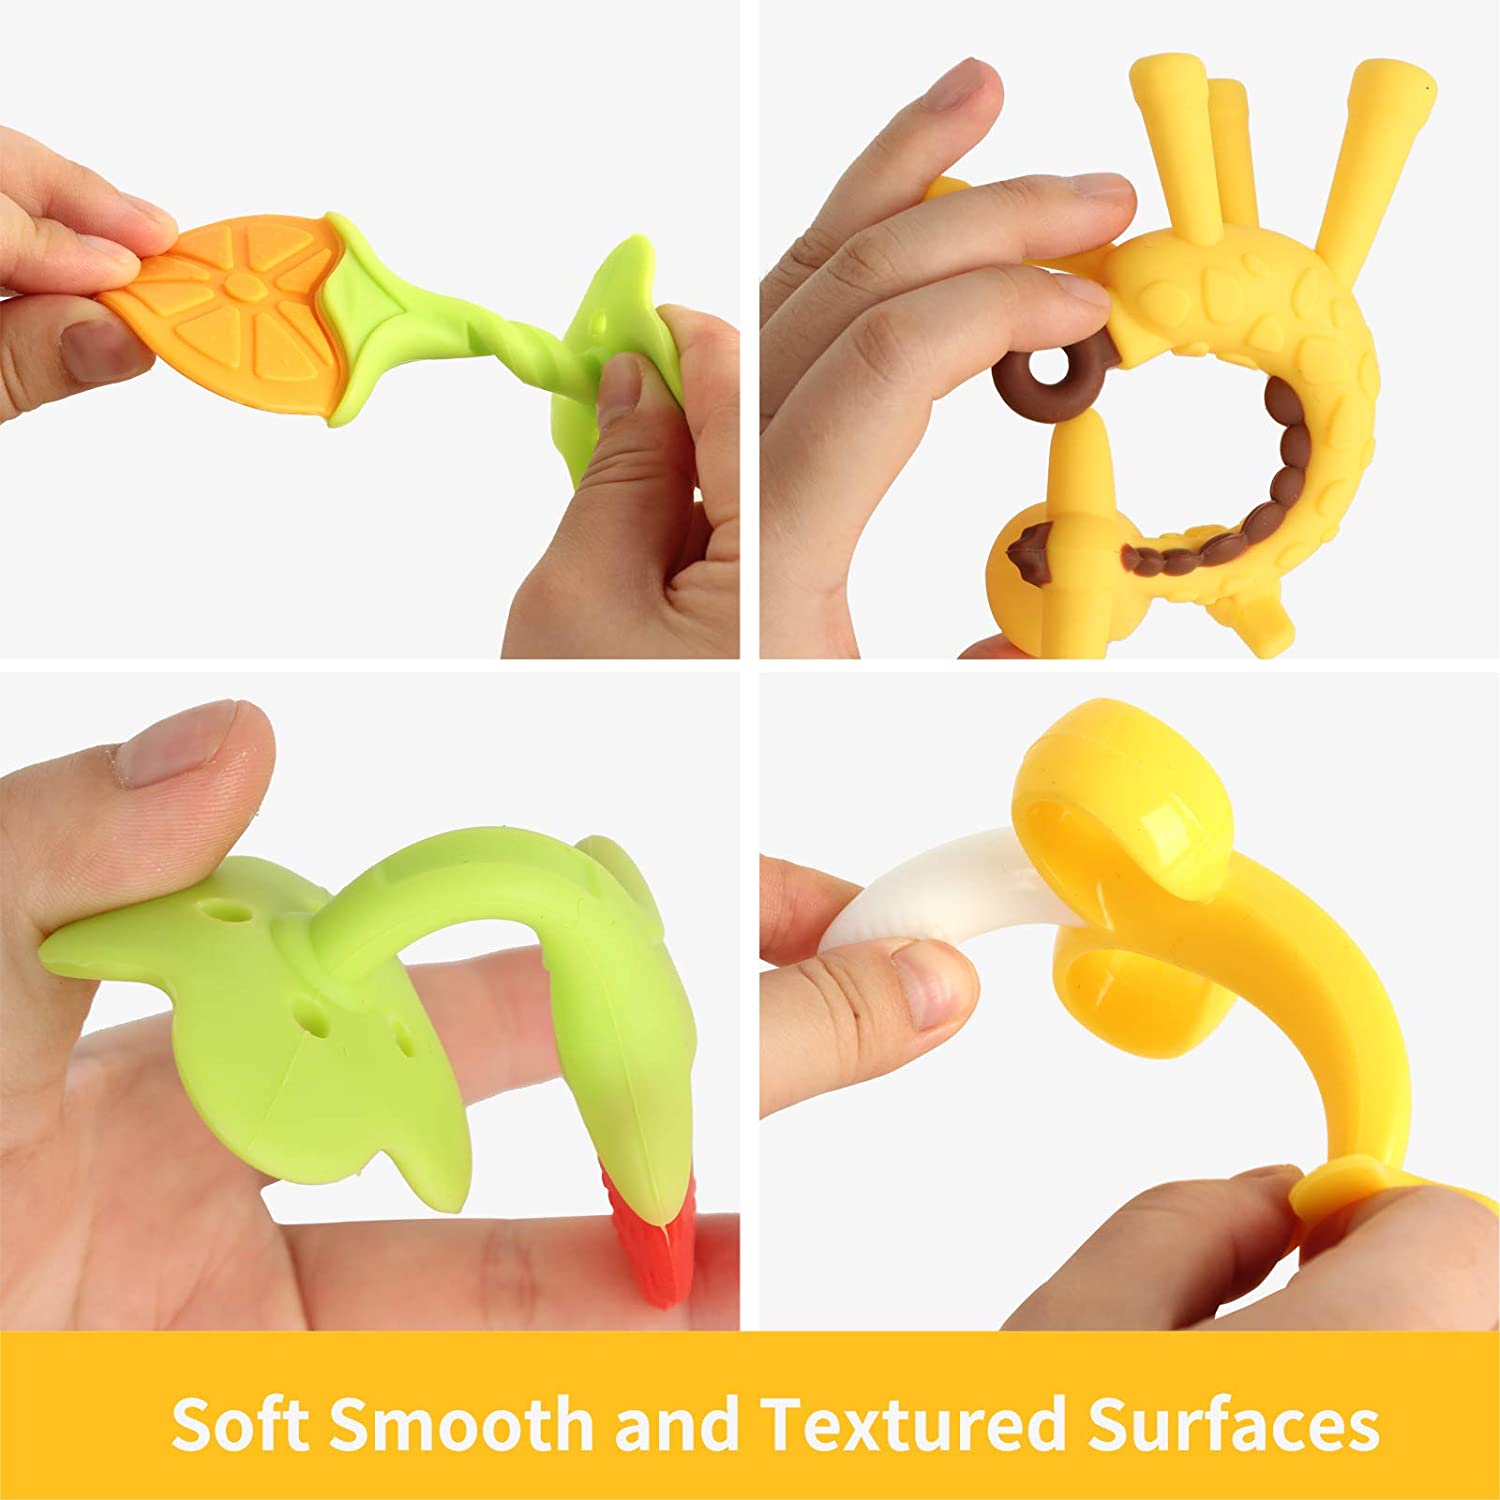 Baby Teething Toys for Newborn (4-Pack) Freezer Safe BPA Free Infant and Toddler Silicone Banana Toothbrushes Fruit Giraffe Teethers Soothe Babies Gums Set with Storage Case